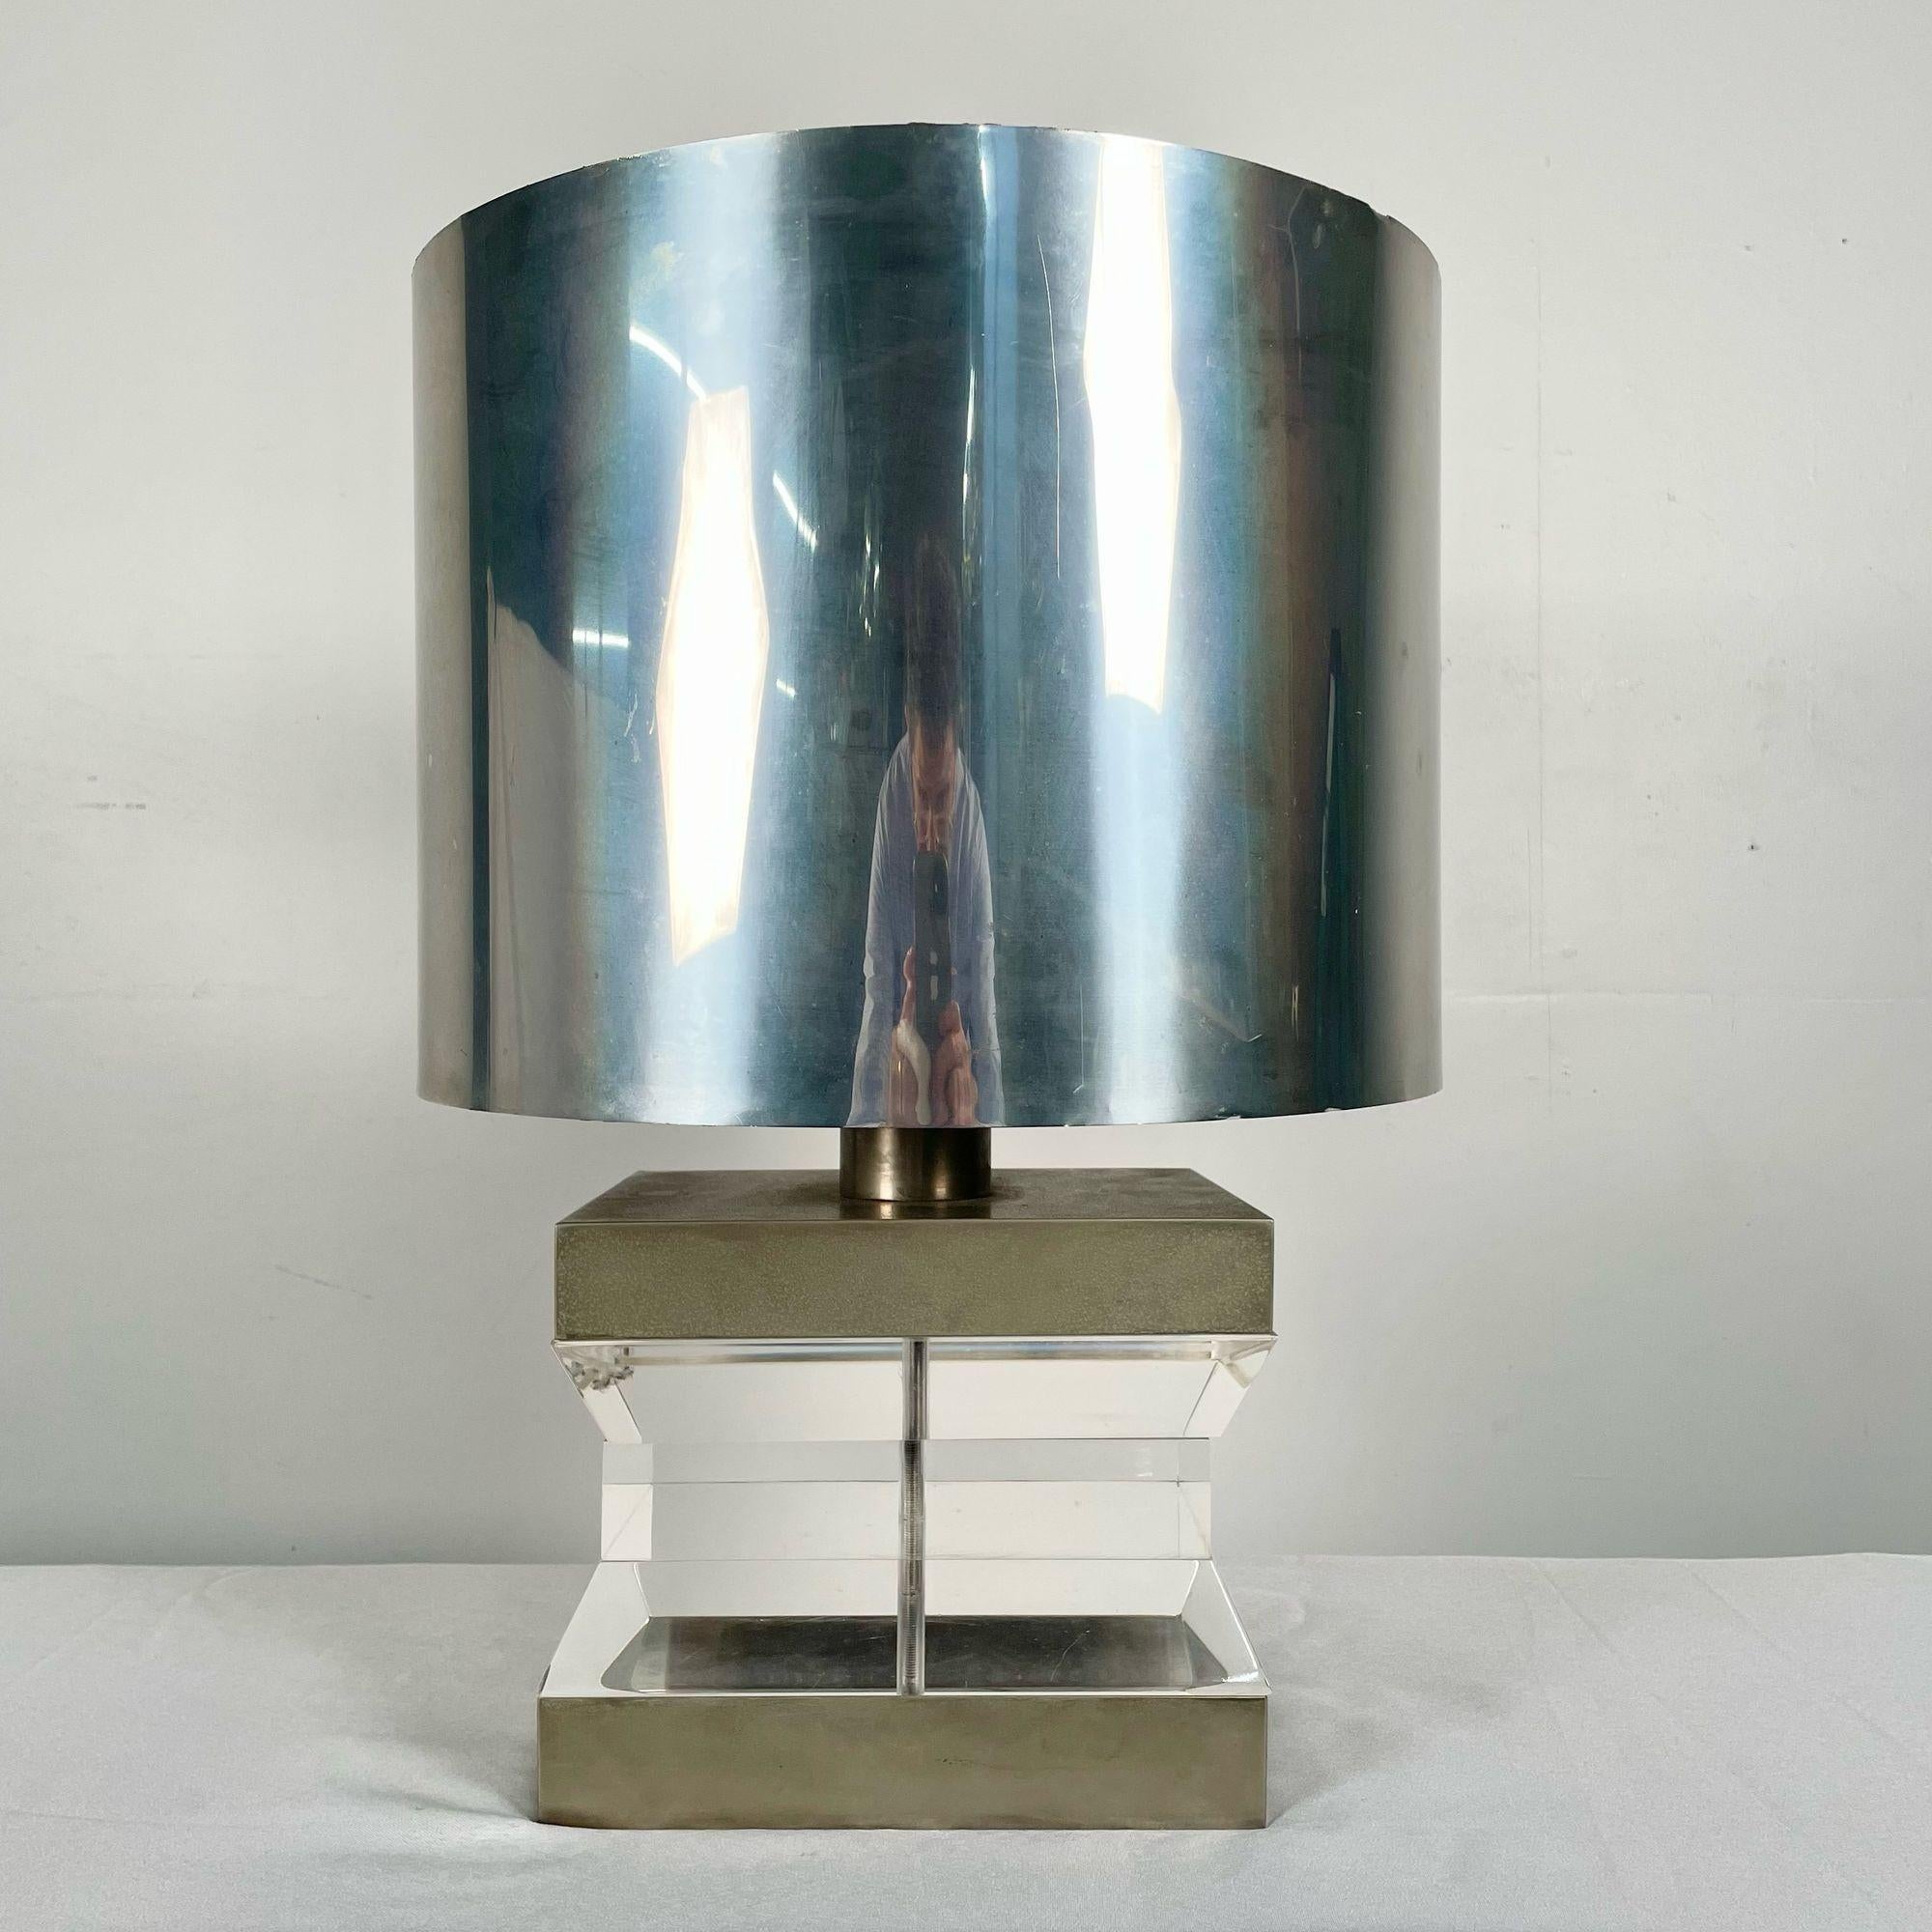 Mid-Century Modern Lucite and Chrome Table / Desk Lamp, Karl Springer Style
 
Single table top lamp in the manner of Karl Springer. Shade included. 
 
Lucite, Chrome
American c. 1980
 
15.5 dia x 21.5 h
 